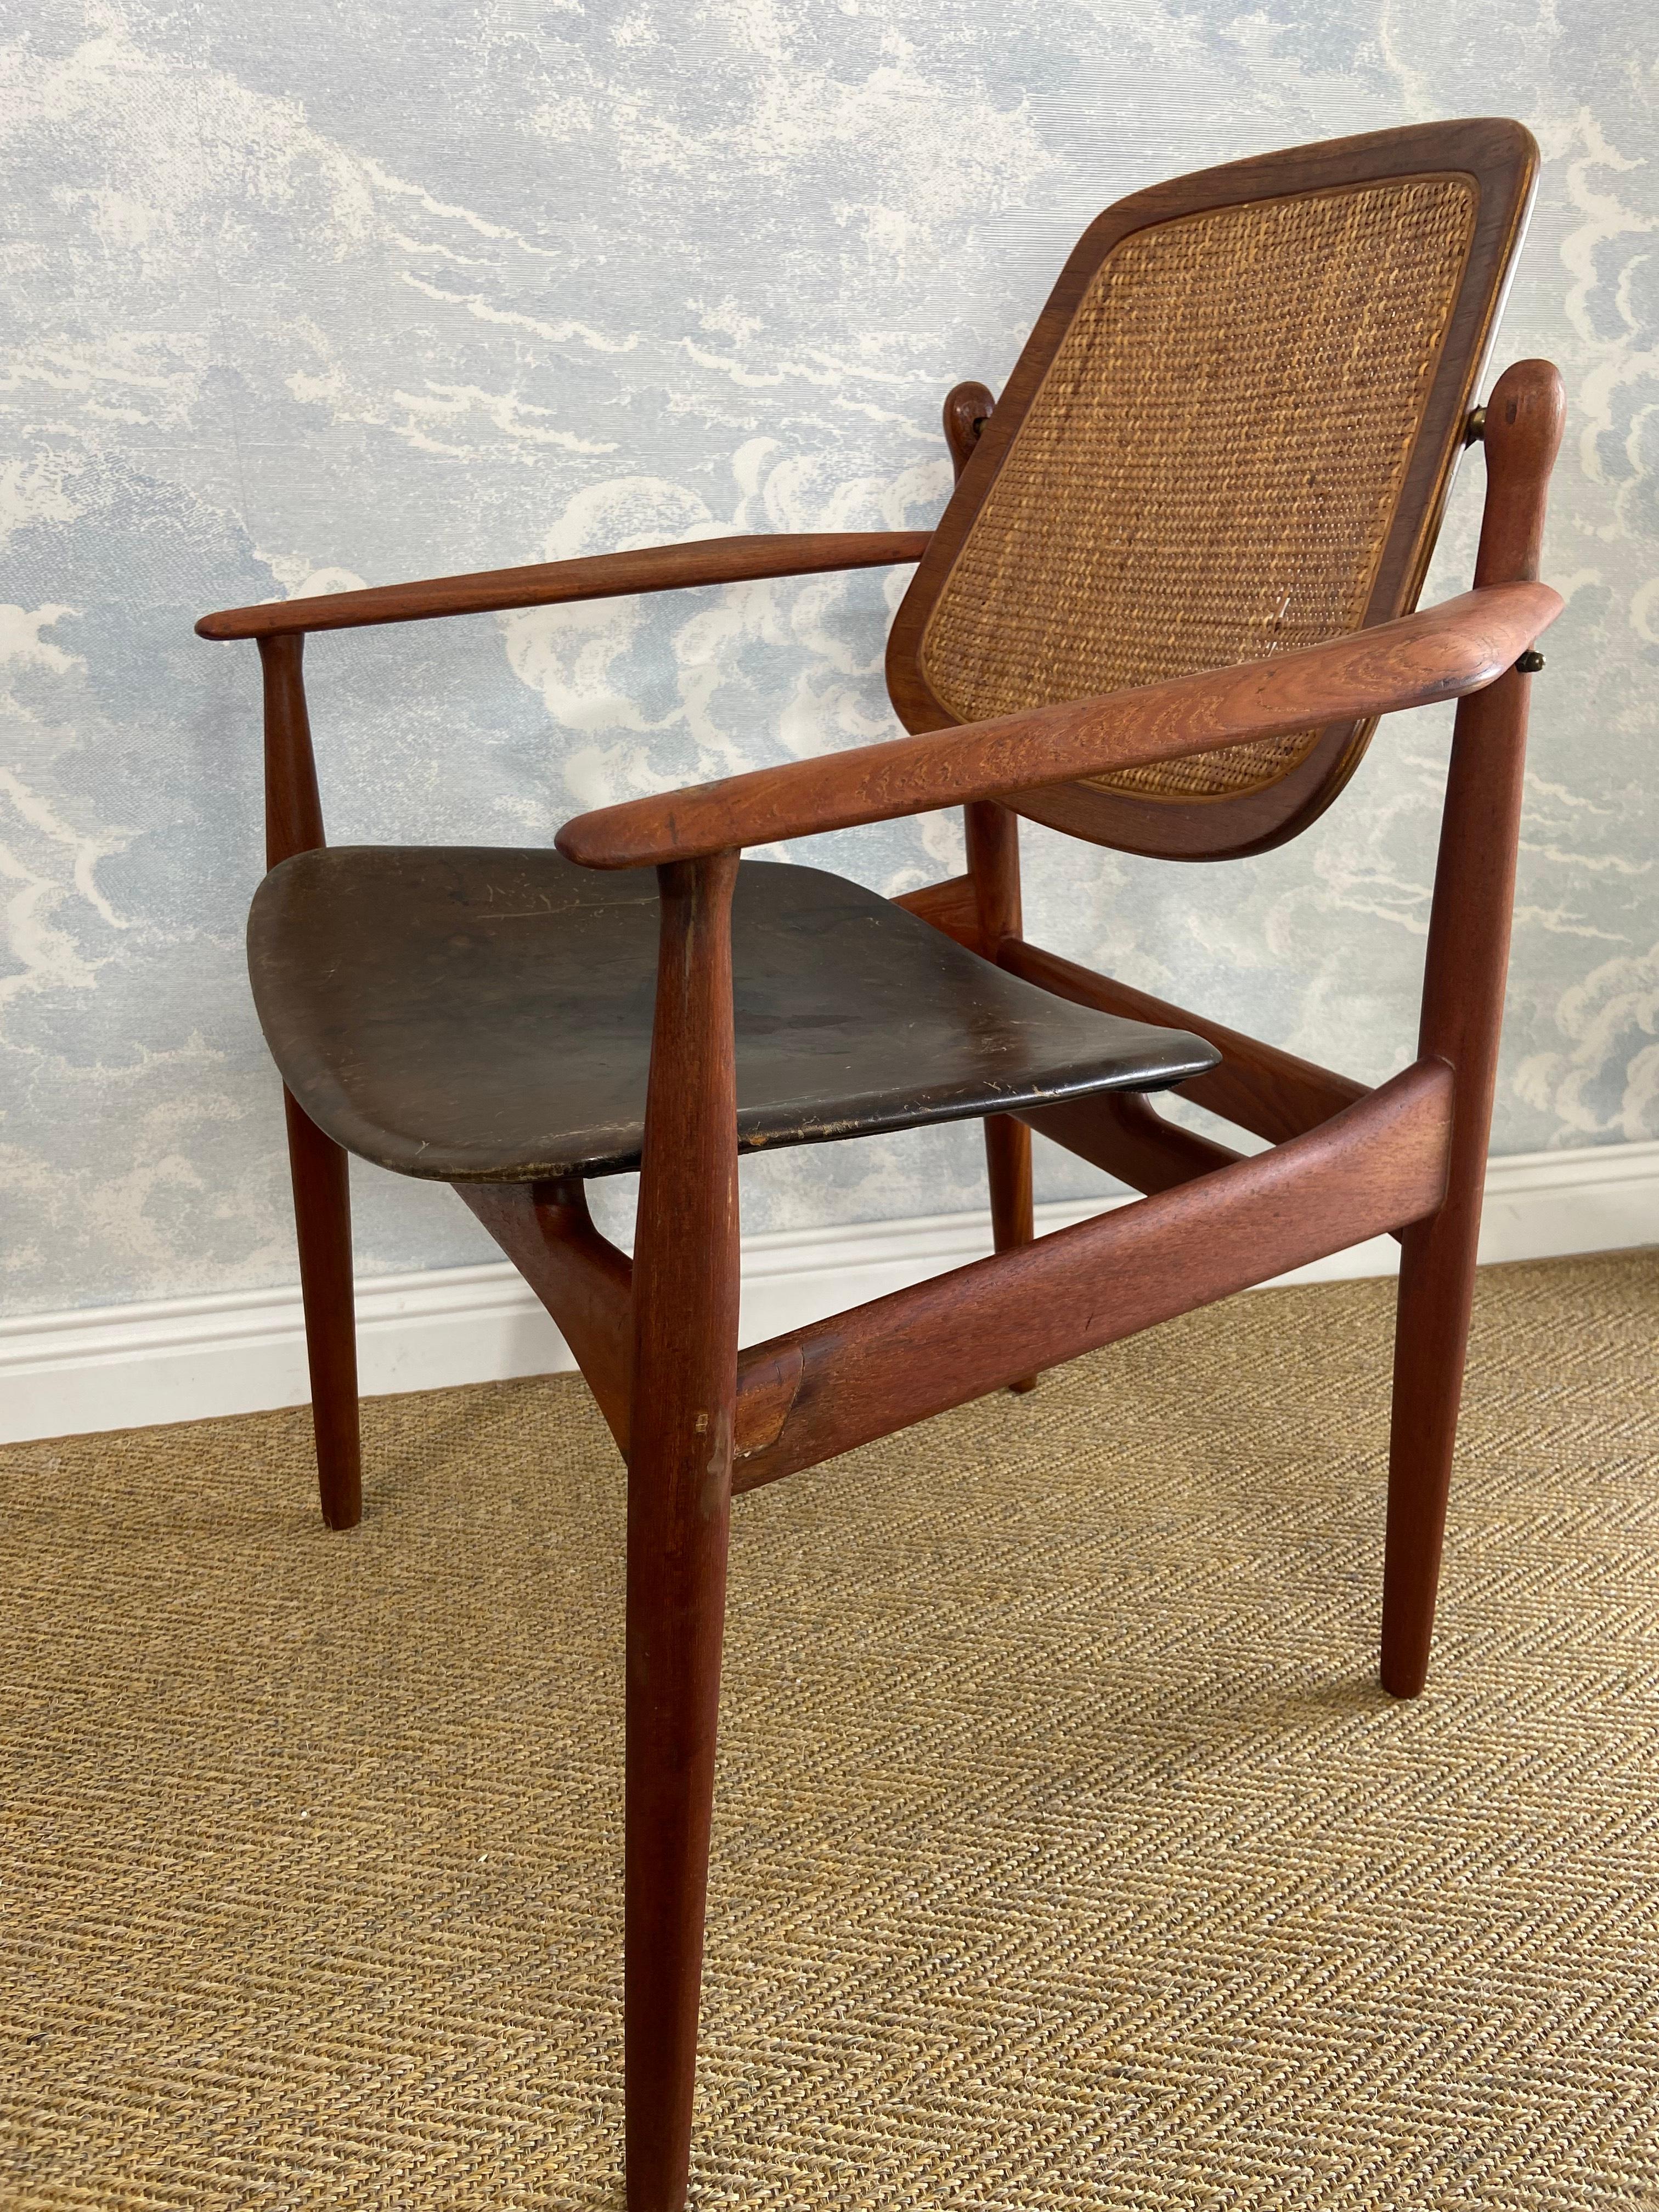 This attractive armchair by Danish furniture manufacturer France & Daverkosen hails from the mid-1950s and is a most comfortable and charming seating option.

Designed by the leading Danish Designer Arne Vodder this model FD186 consists of a teak